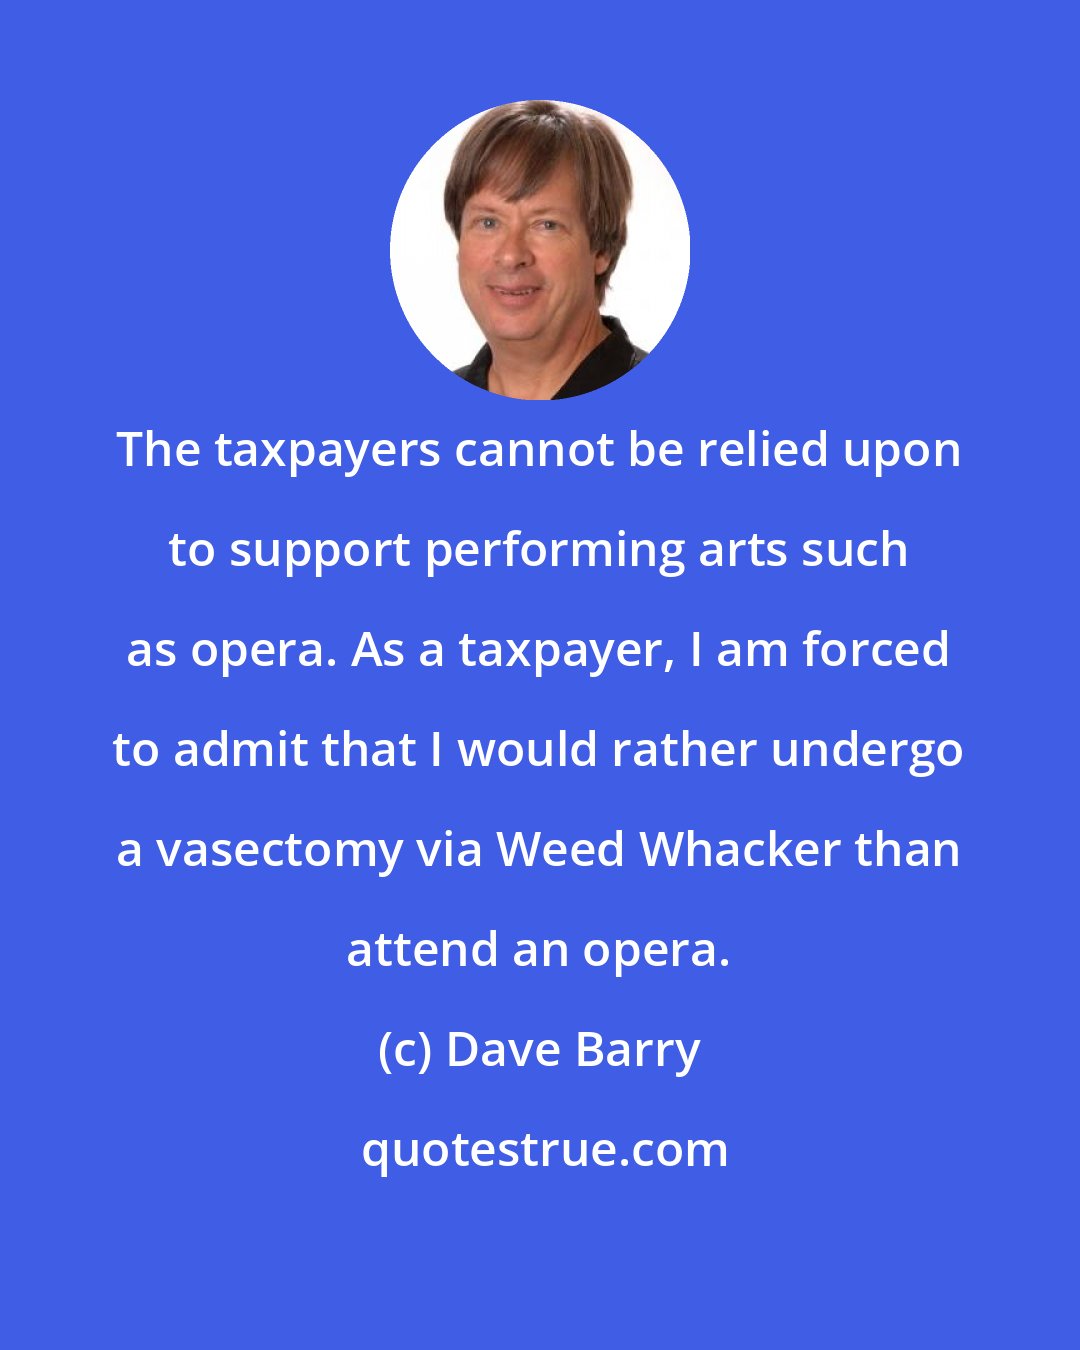 Dave Barry: The taxpayers cannot be relied upon to support performing arts such as opera. As a taxpayer, I am forced to admit that I would rather undergo a vasectomy via Weed Whacker than attend an opera.